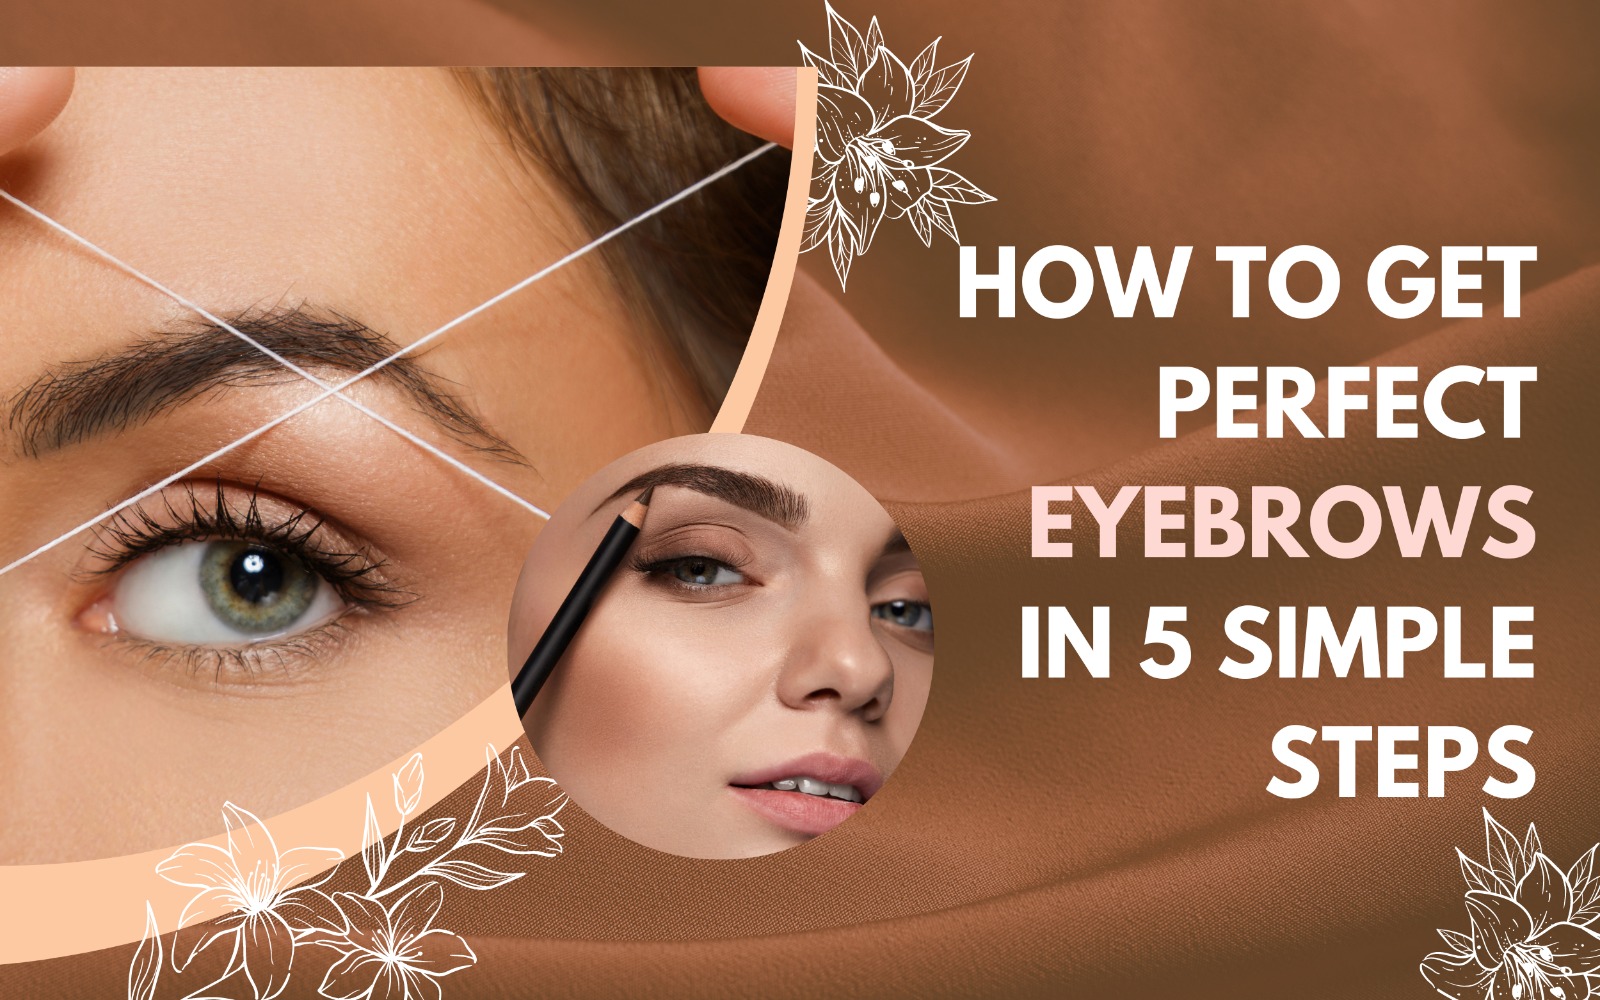 How to get perfect eyebrows in 5 simple steps.jpeg